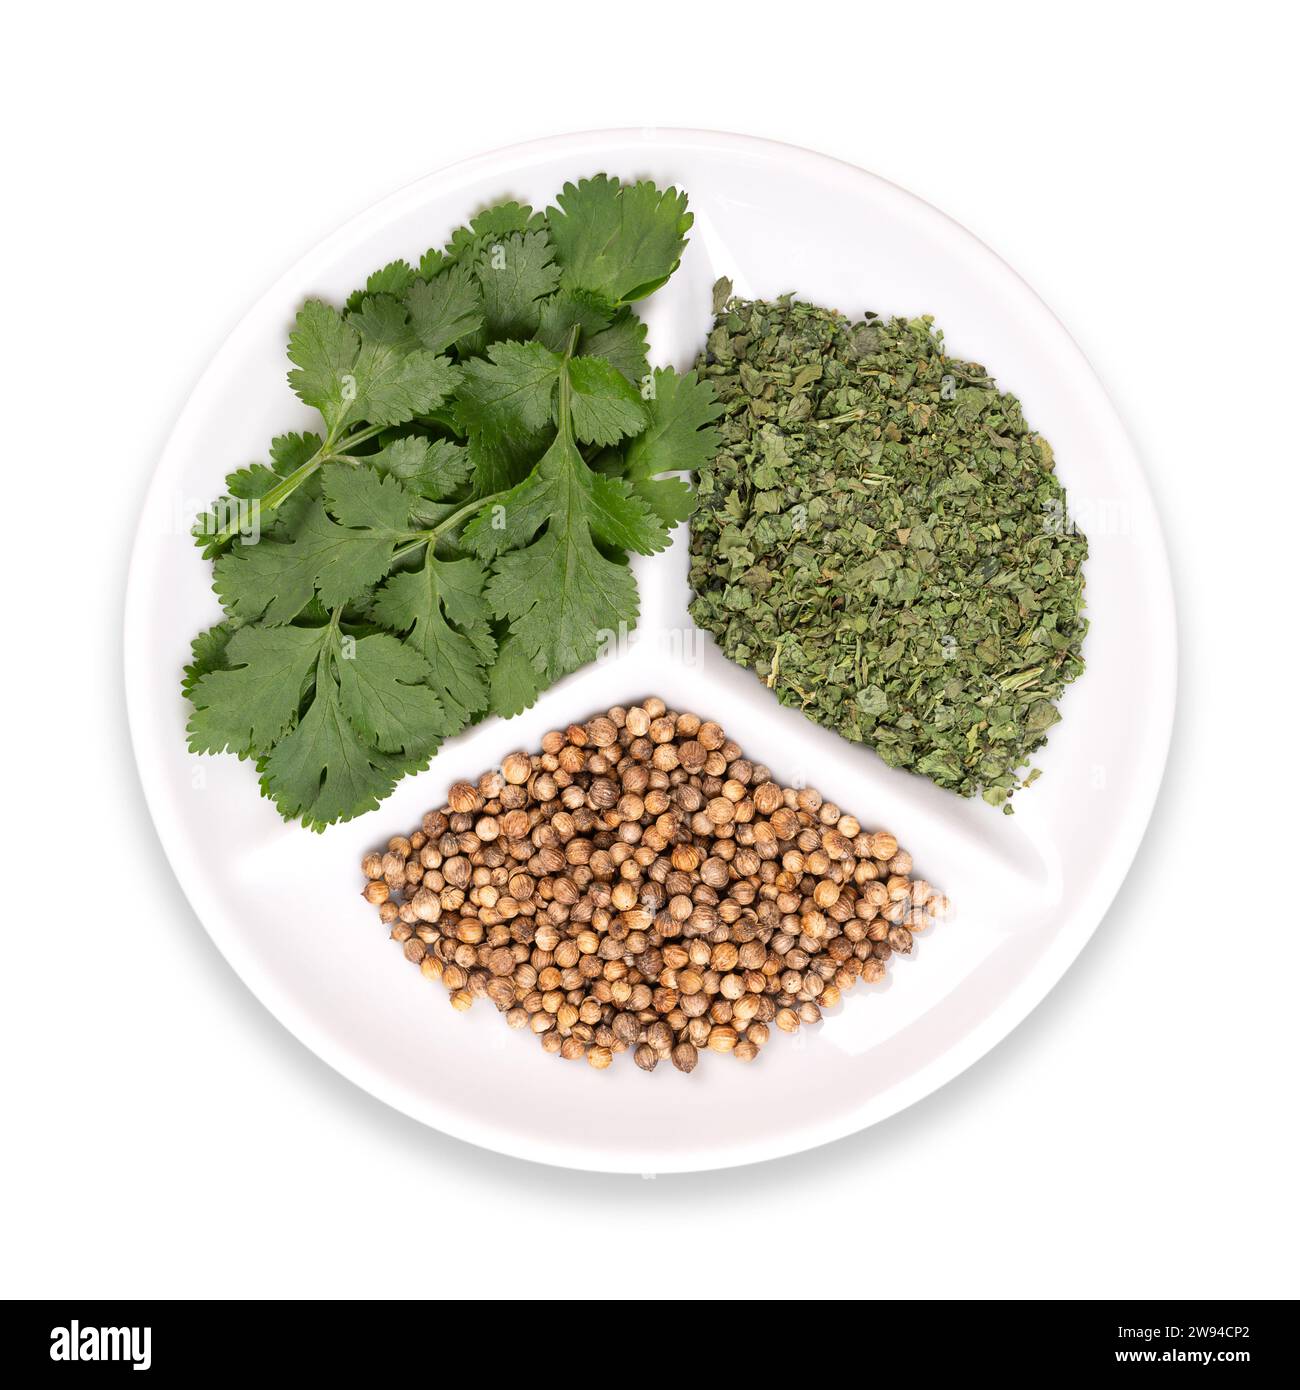 Dried and fresh cilantro leaves, with coriander seeds, in white bowl. Annual herb used in cooking. Fresh leaves and dried seeds are most commonly used. Stock Photo